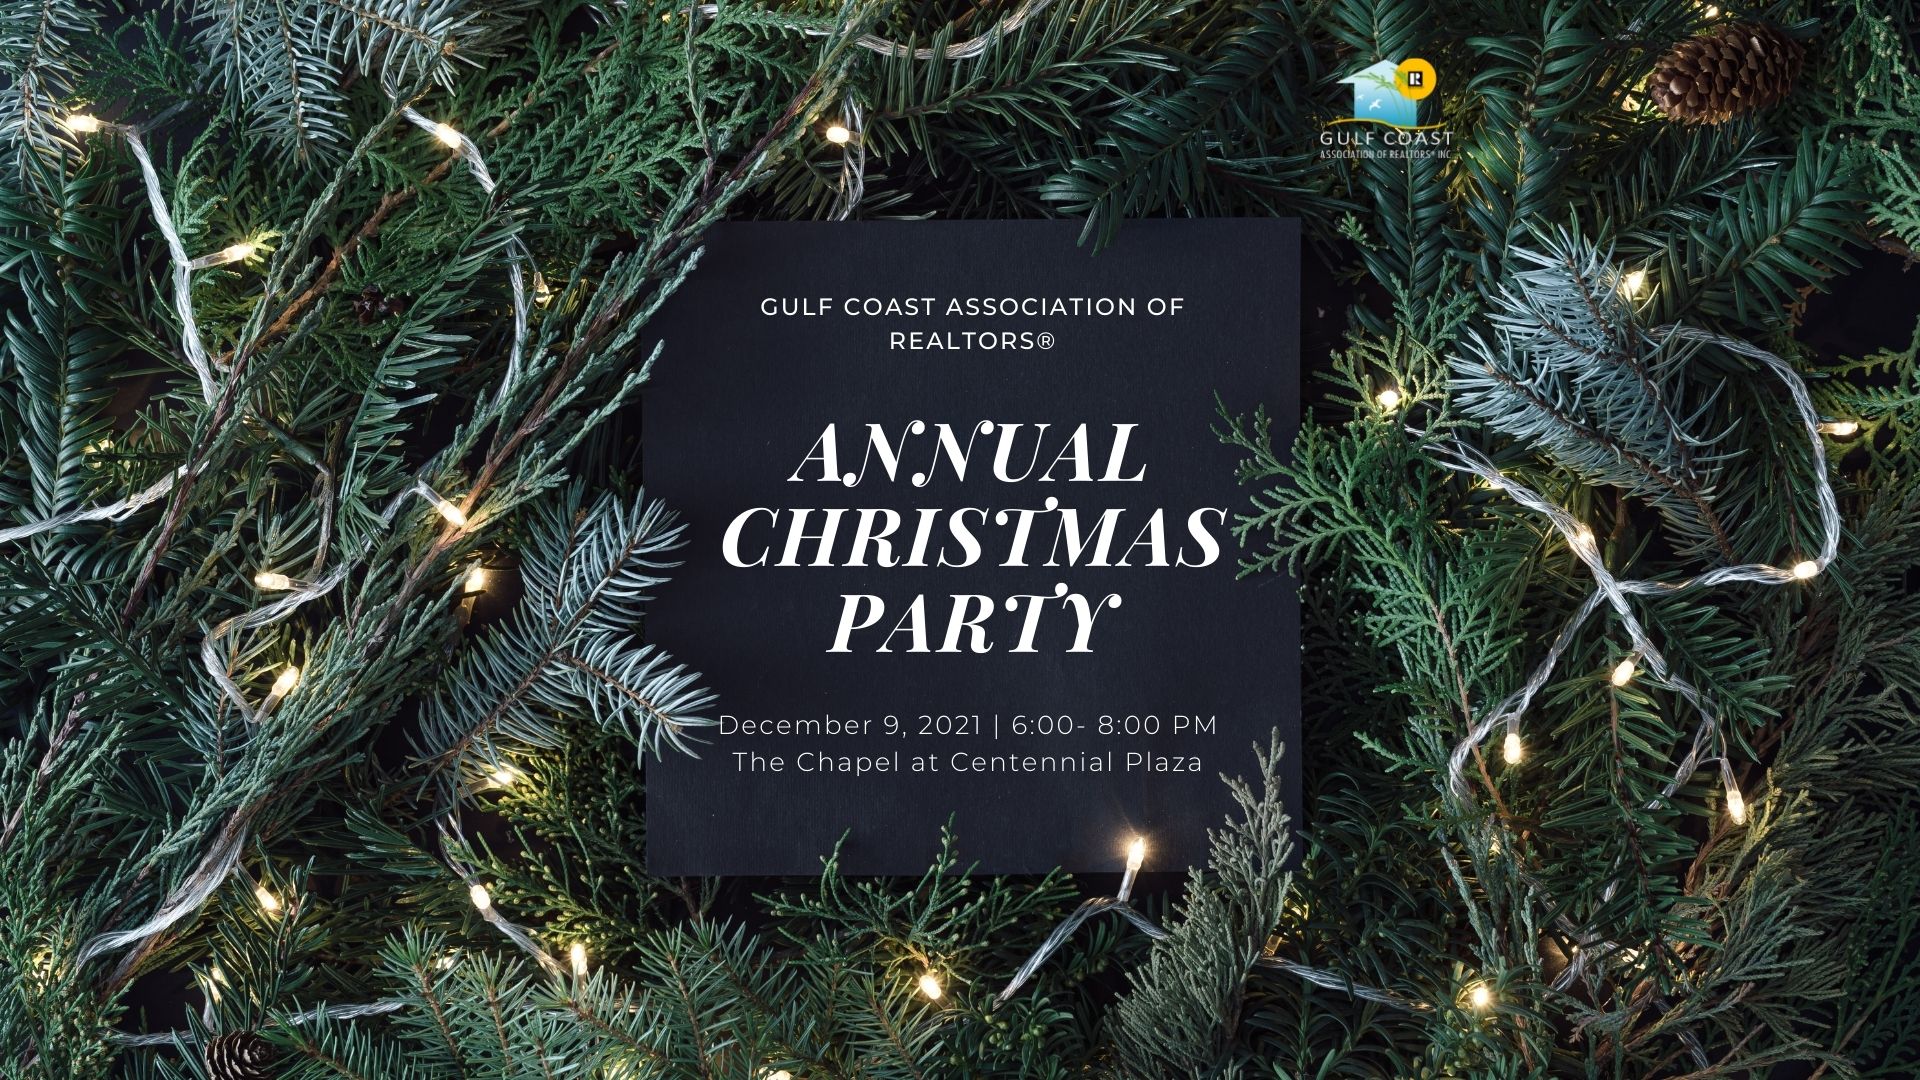 Green Christmas Party Invitation Facebook Event Cover